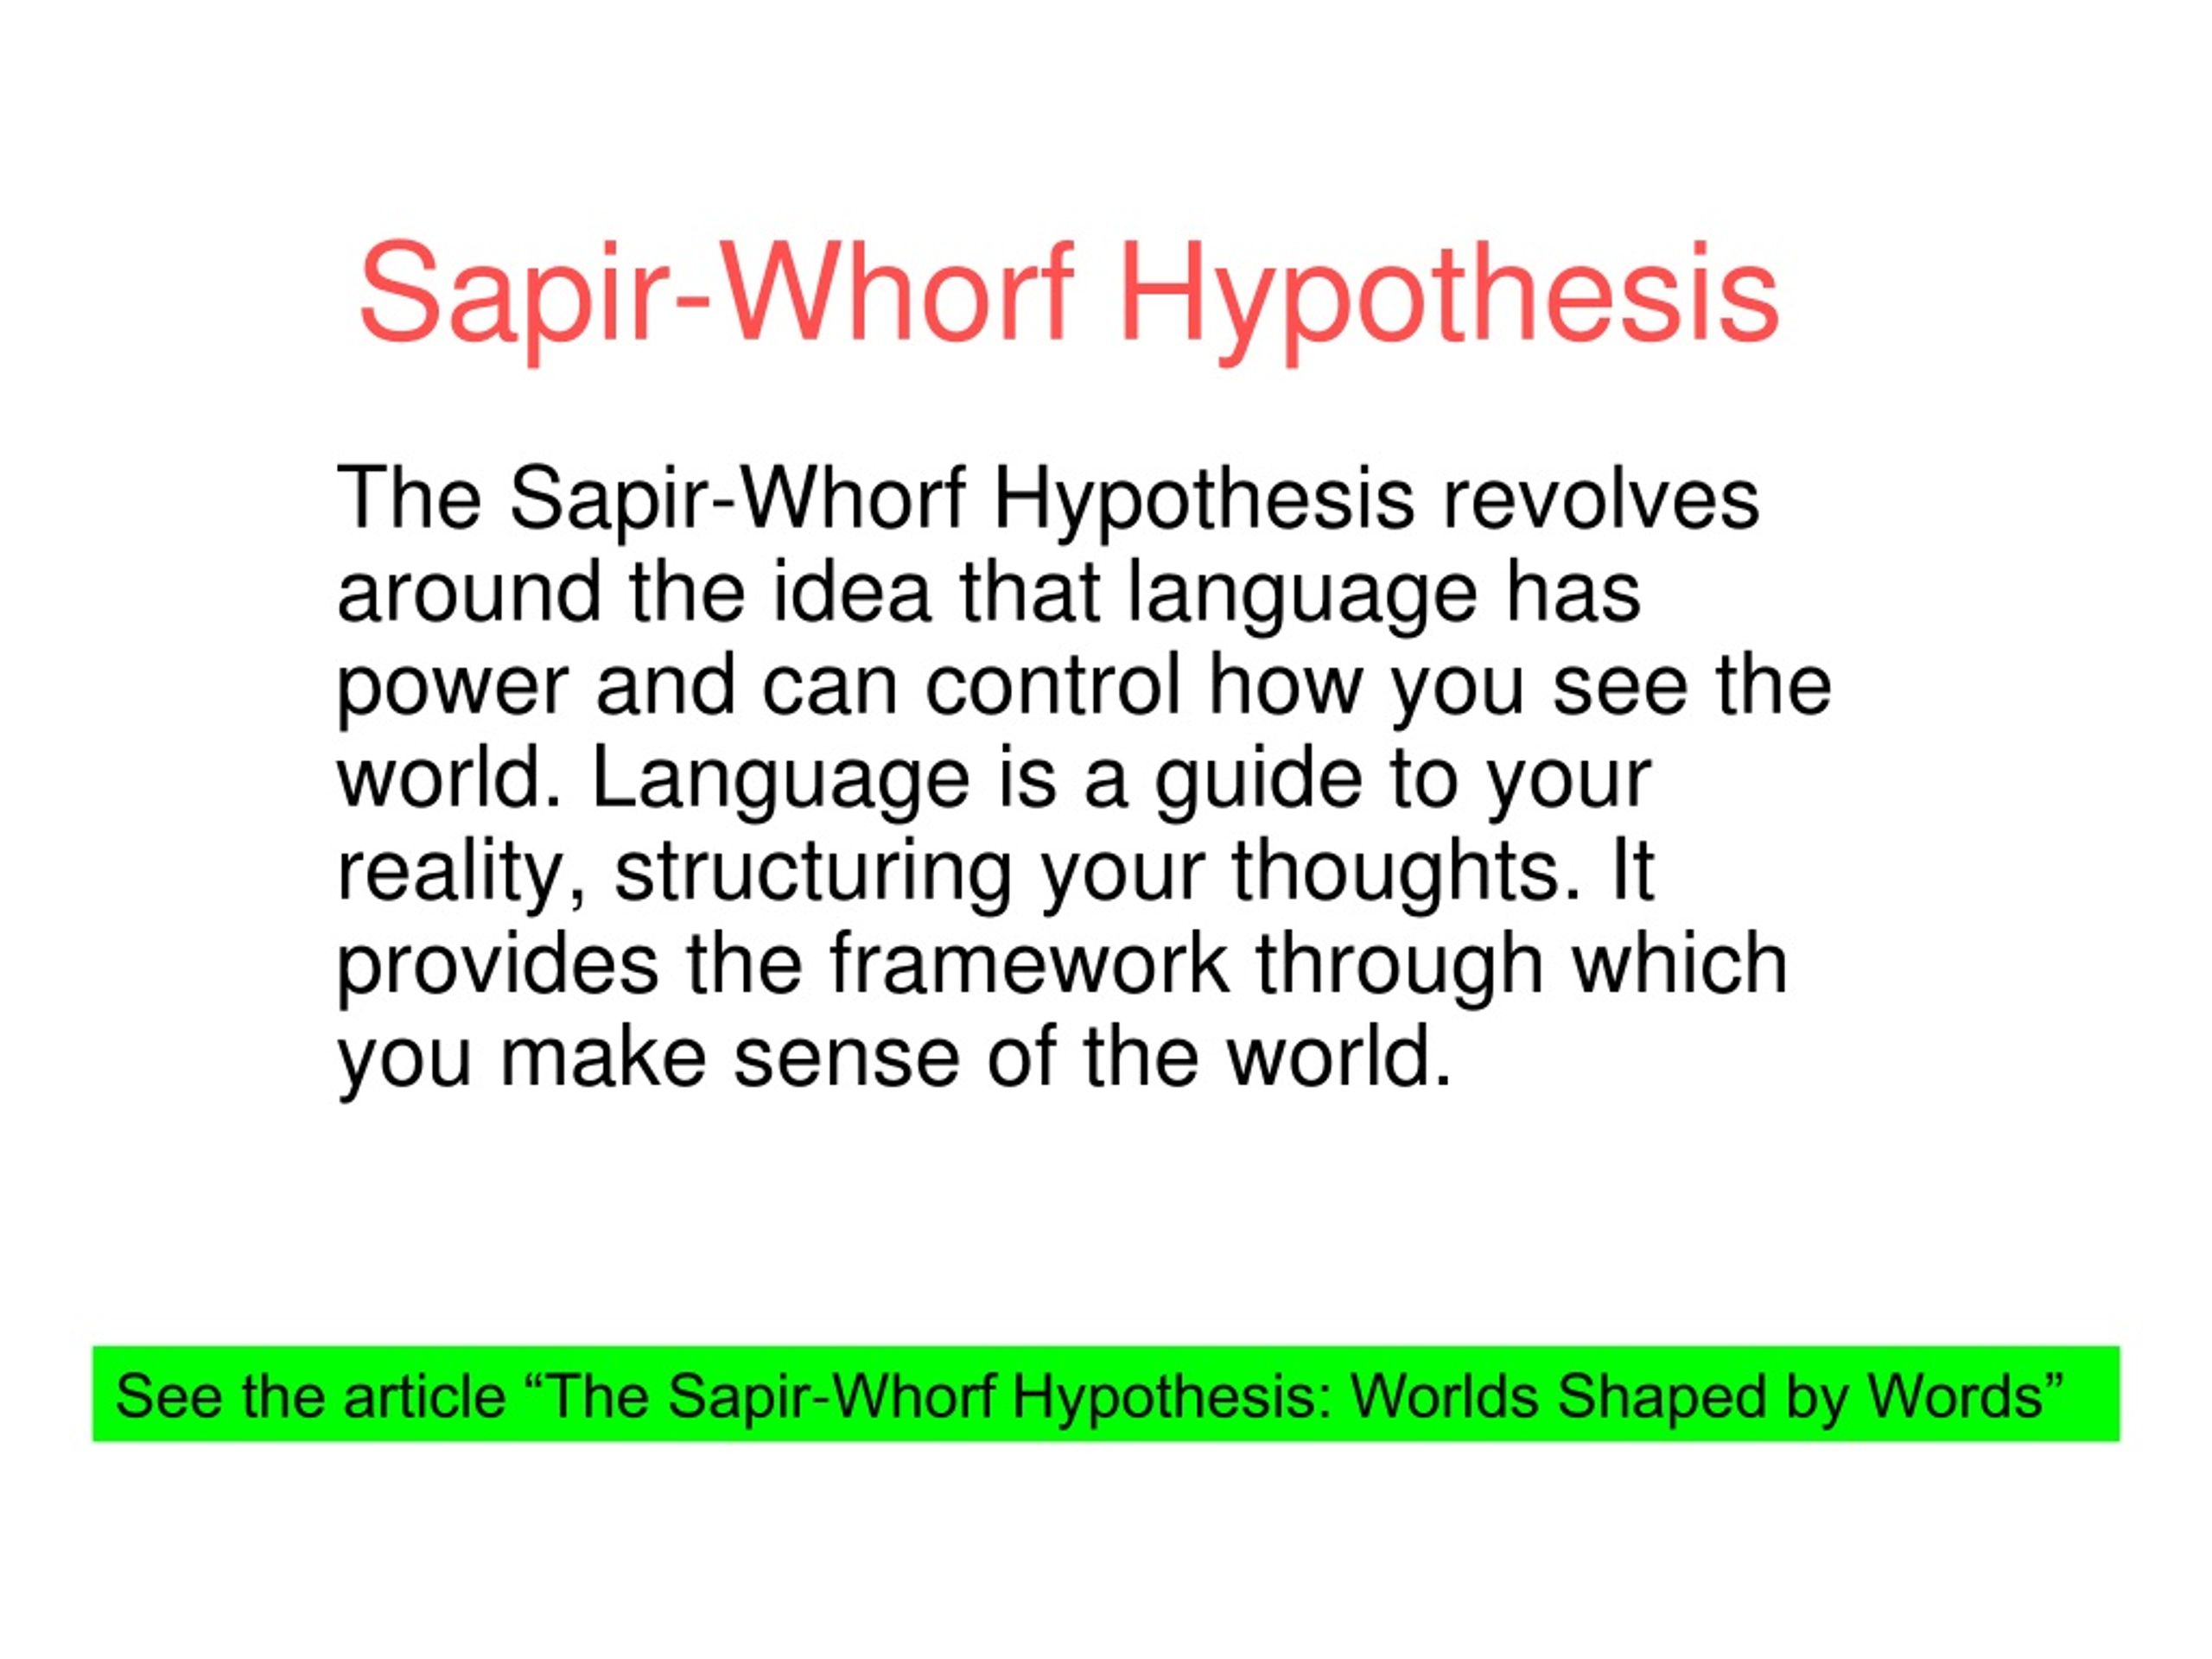 sapir whorf hypothesis examples ppt